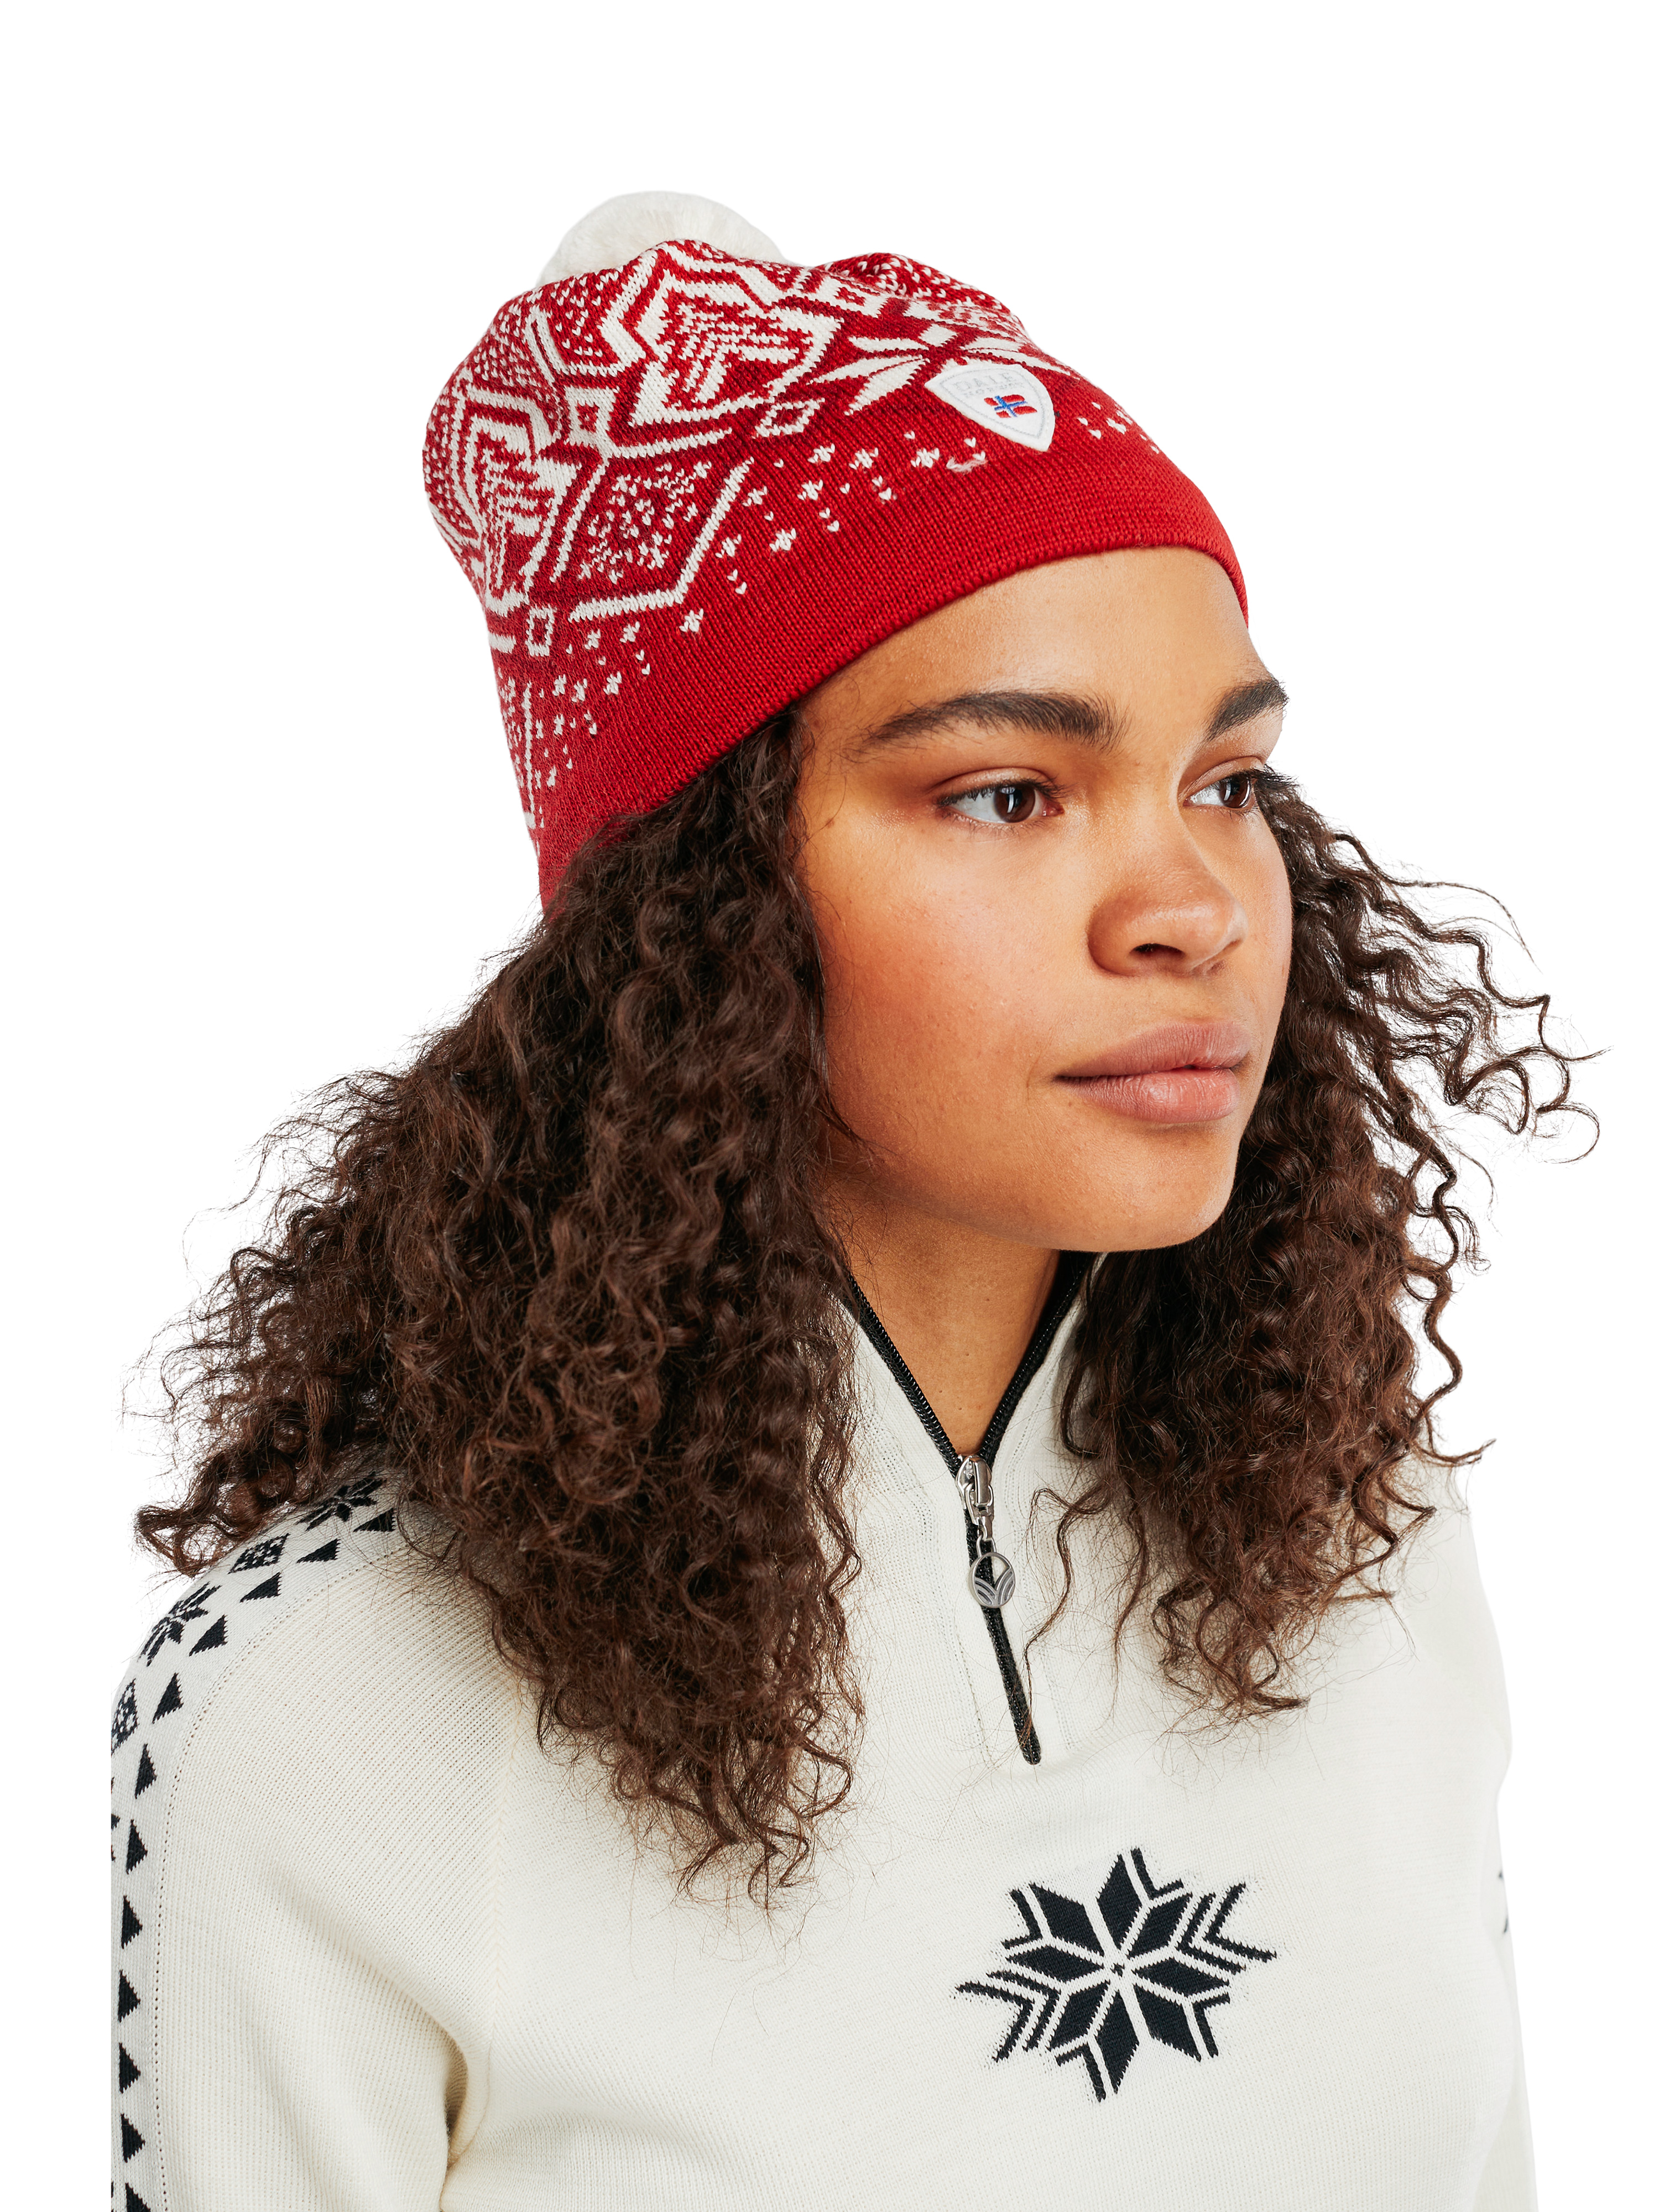 Winterland hat - Unisex - Red - Dale of Norway - Dale of Norway